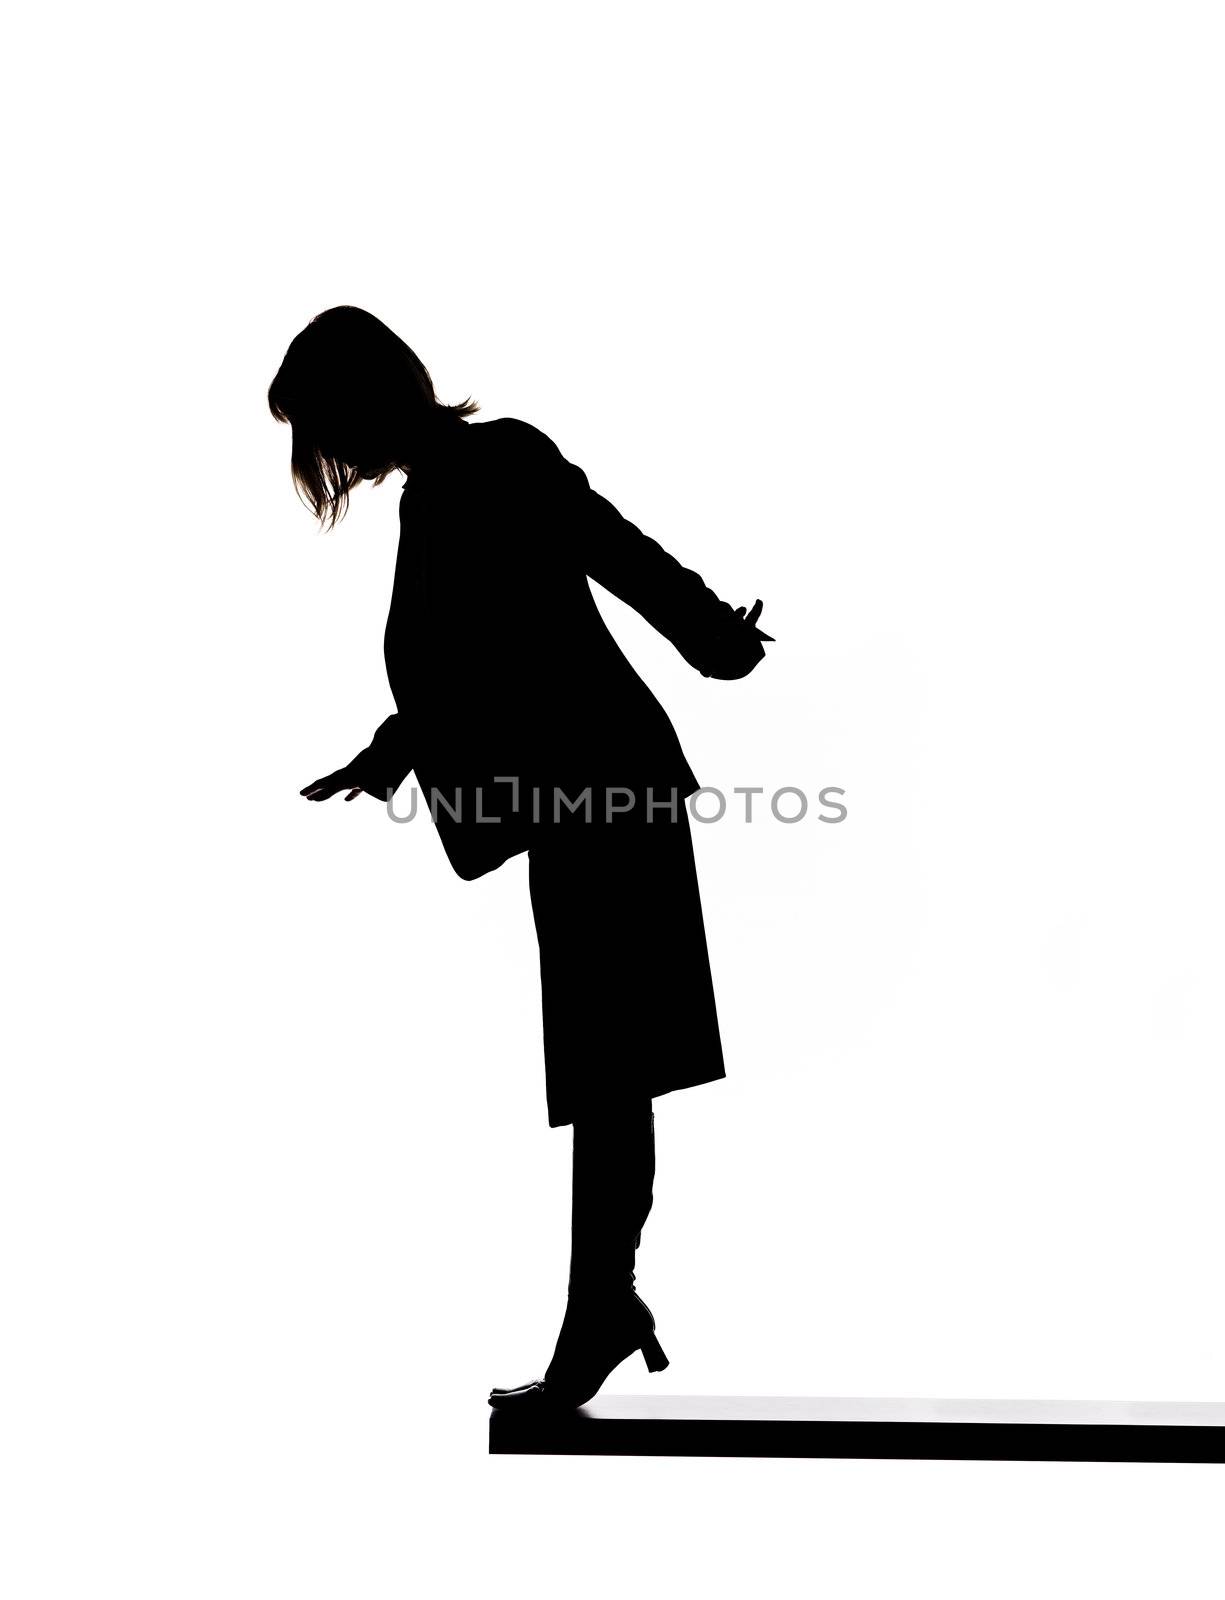 Silhouette of a woman close to fall down by gemenacom